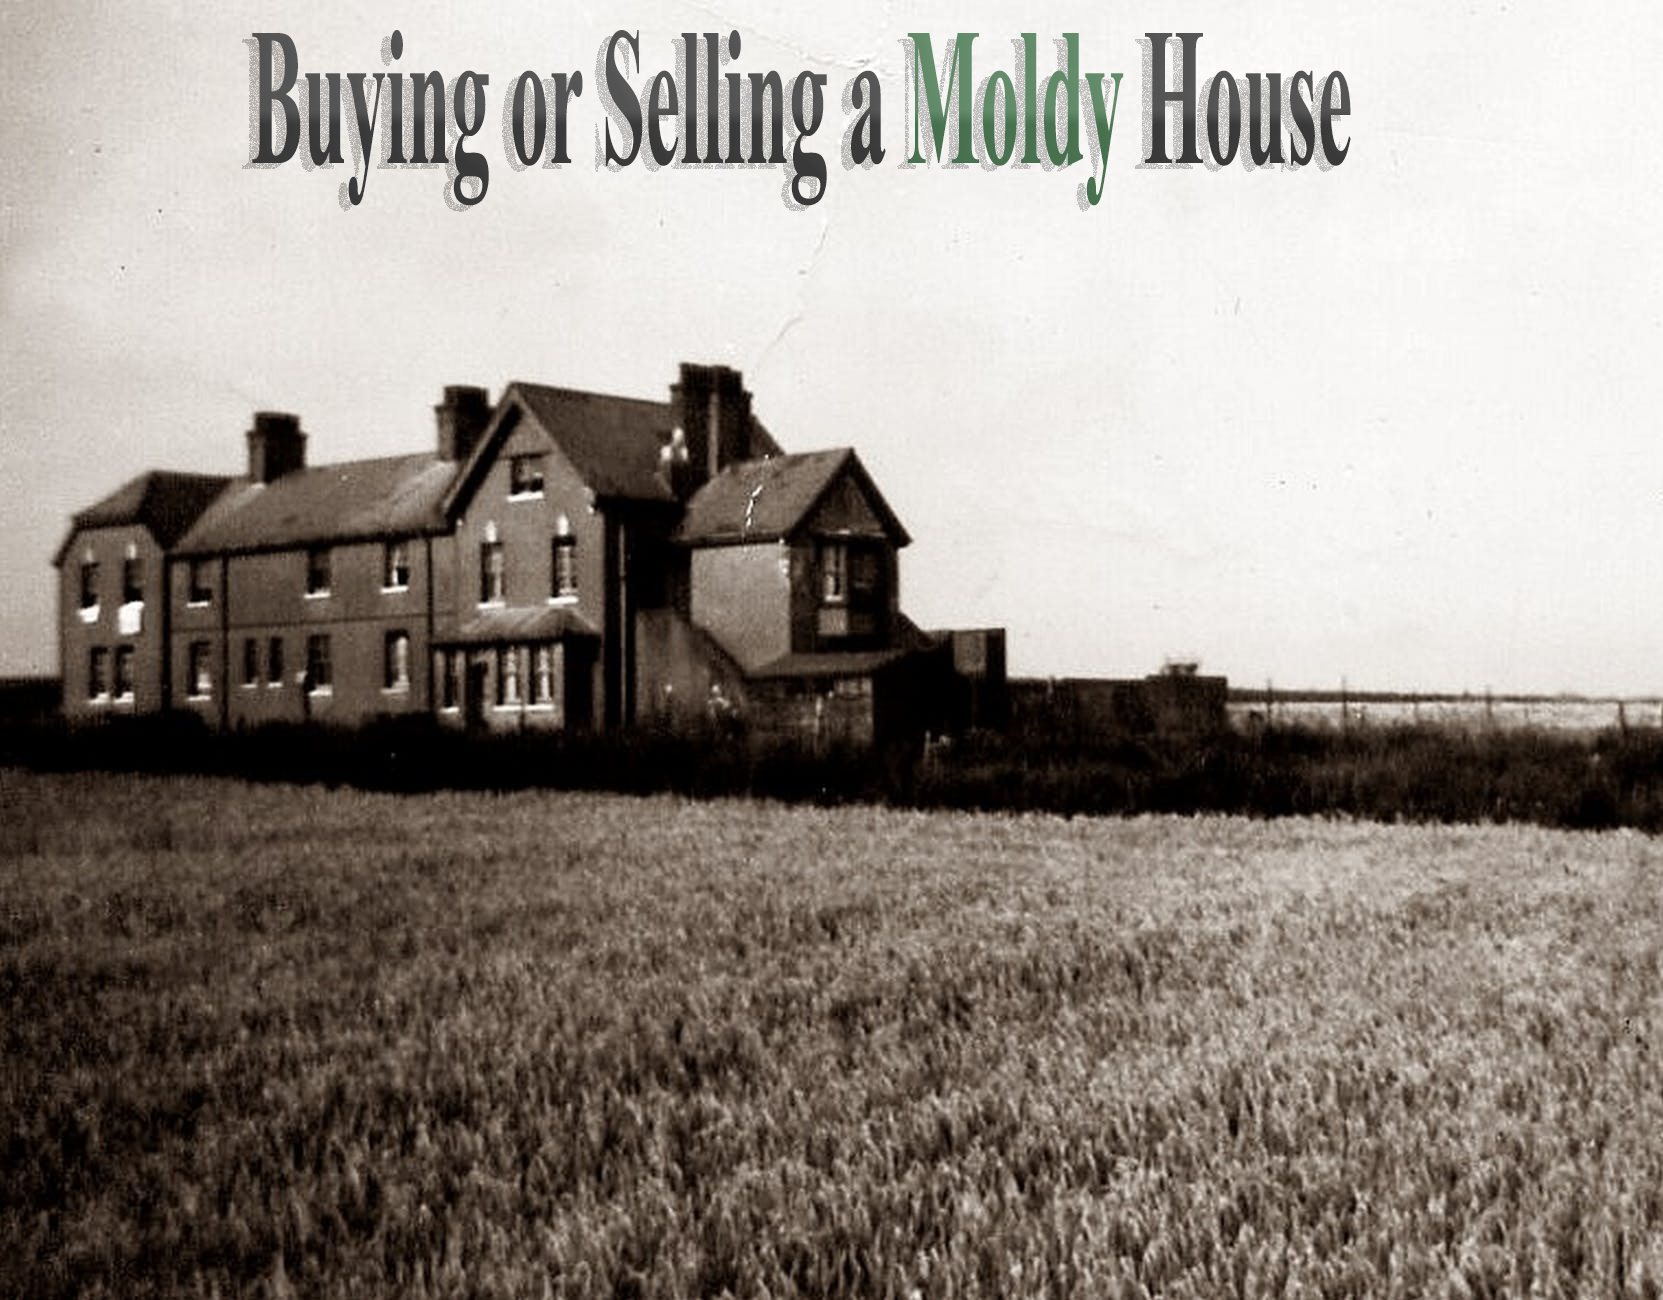 Buying or Selling a Moldy House